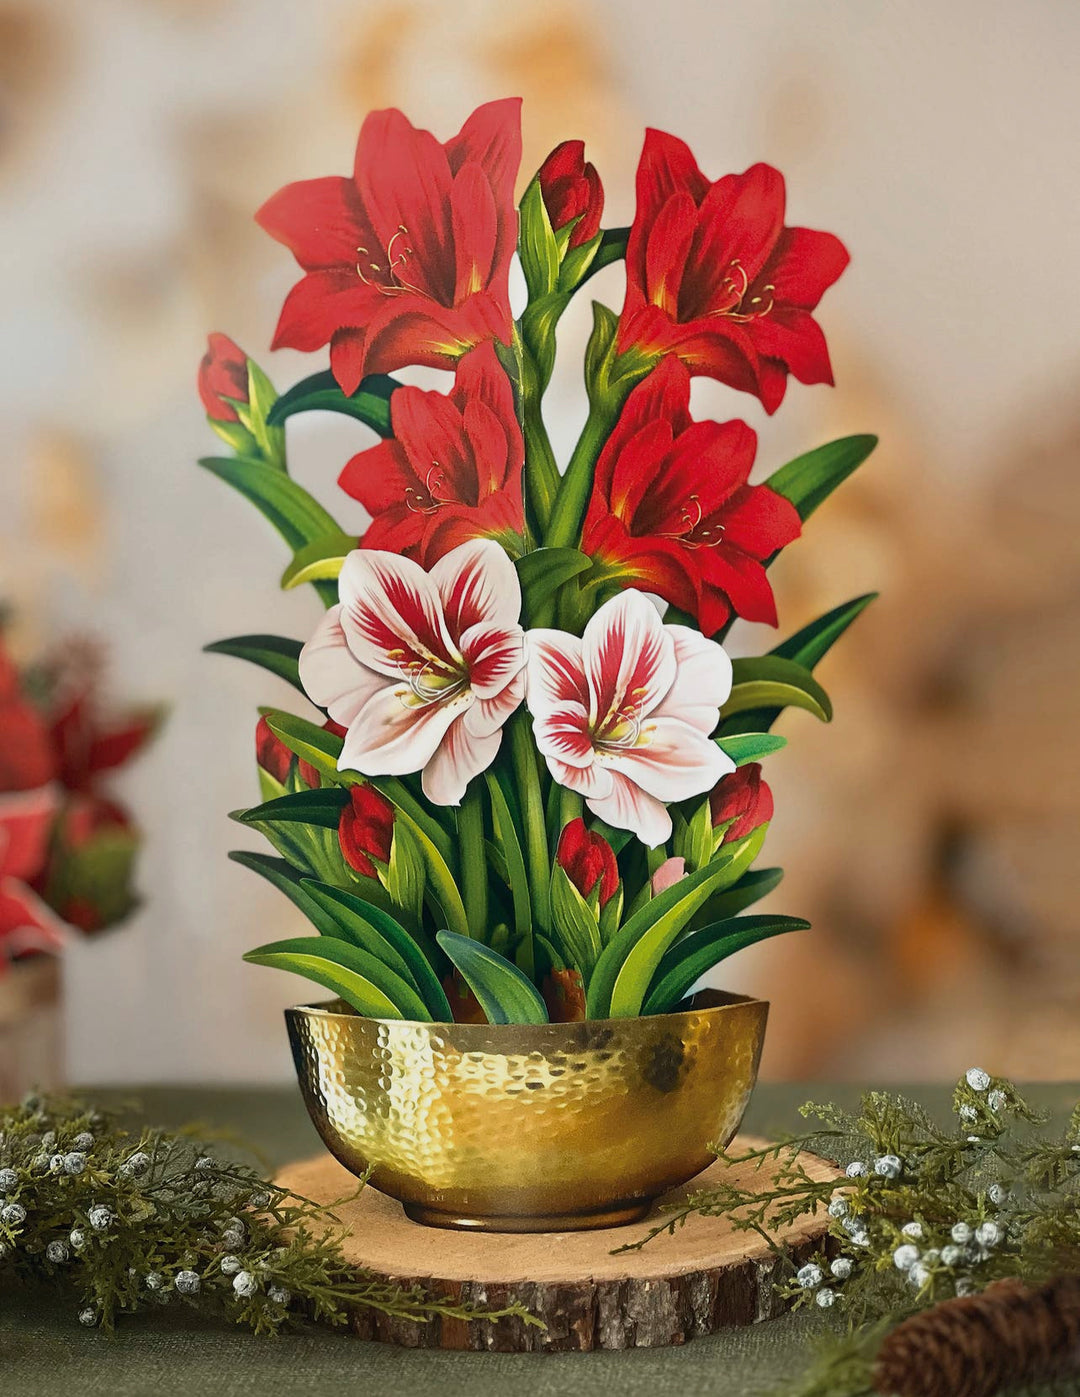 Pop-up 3D Greeting Card, Scarlet Amaryllis-220 Beauty/Gift-Inspired by Justeen-Women's Clothing Boutique in Chicago, Illinois